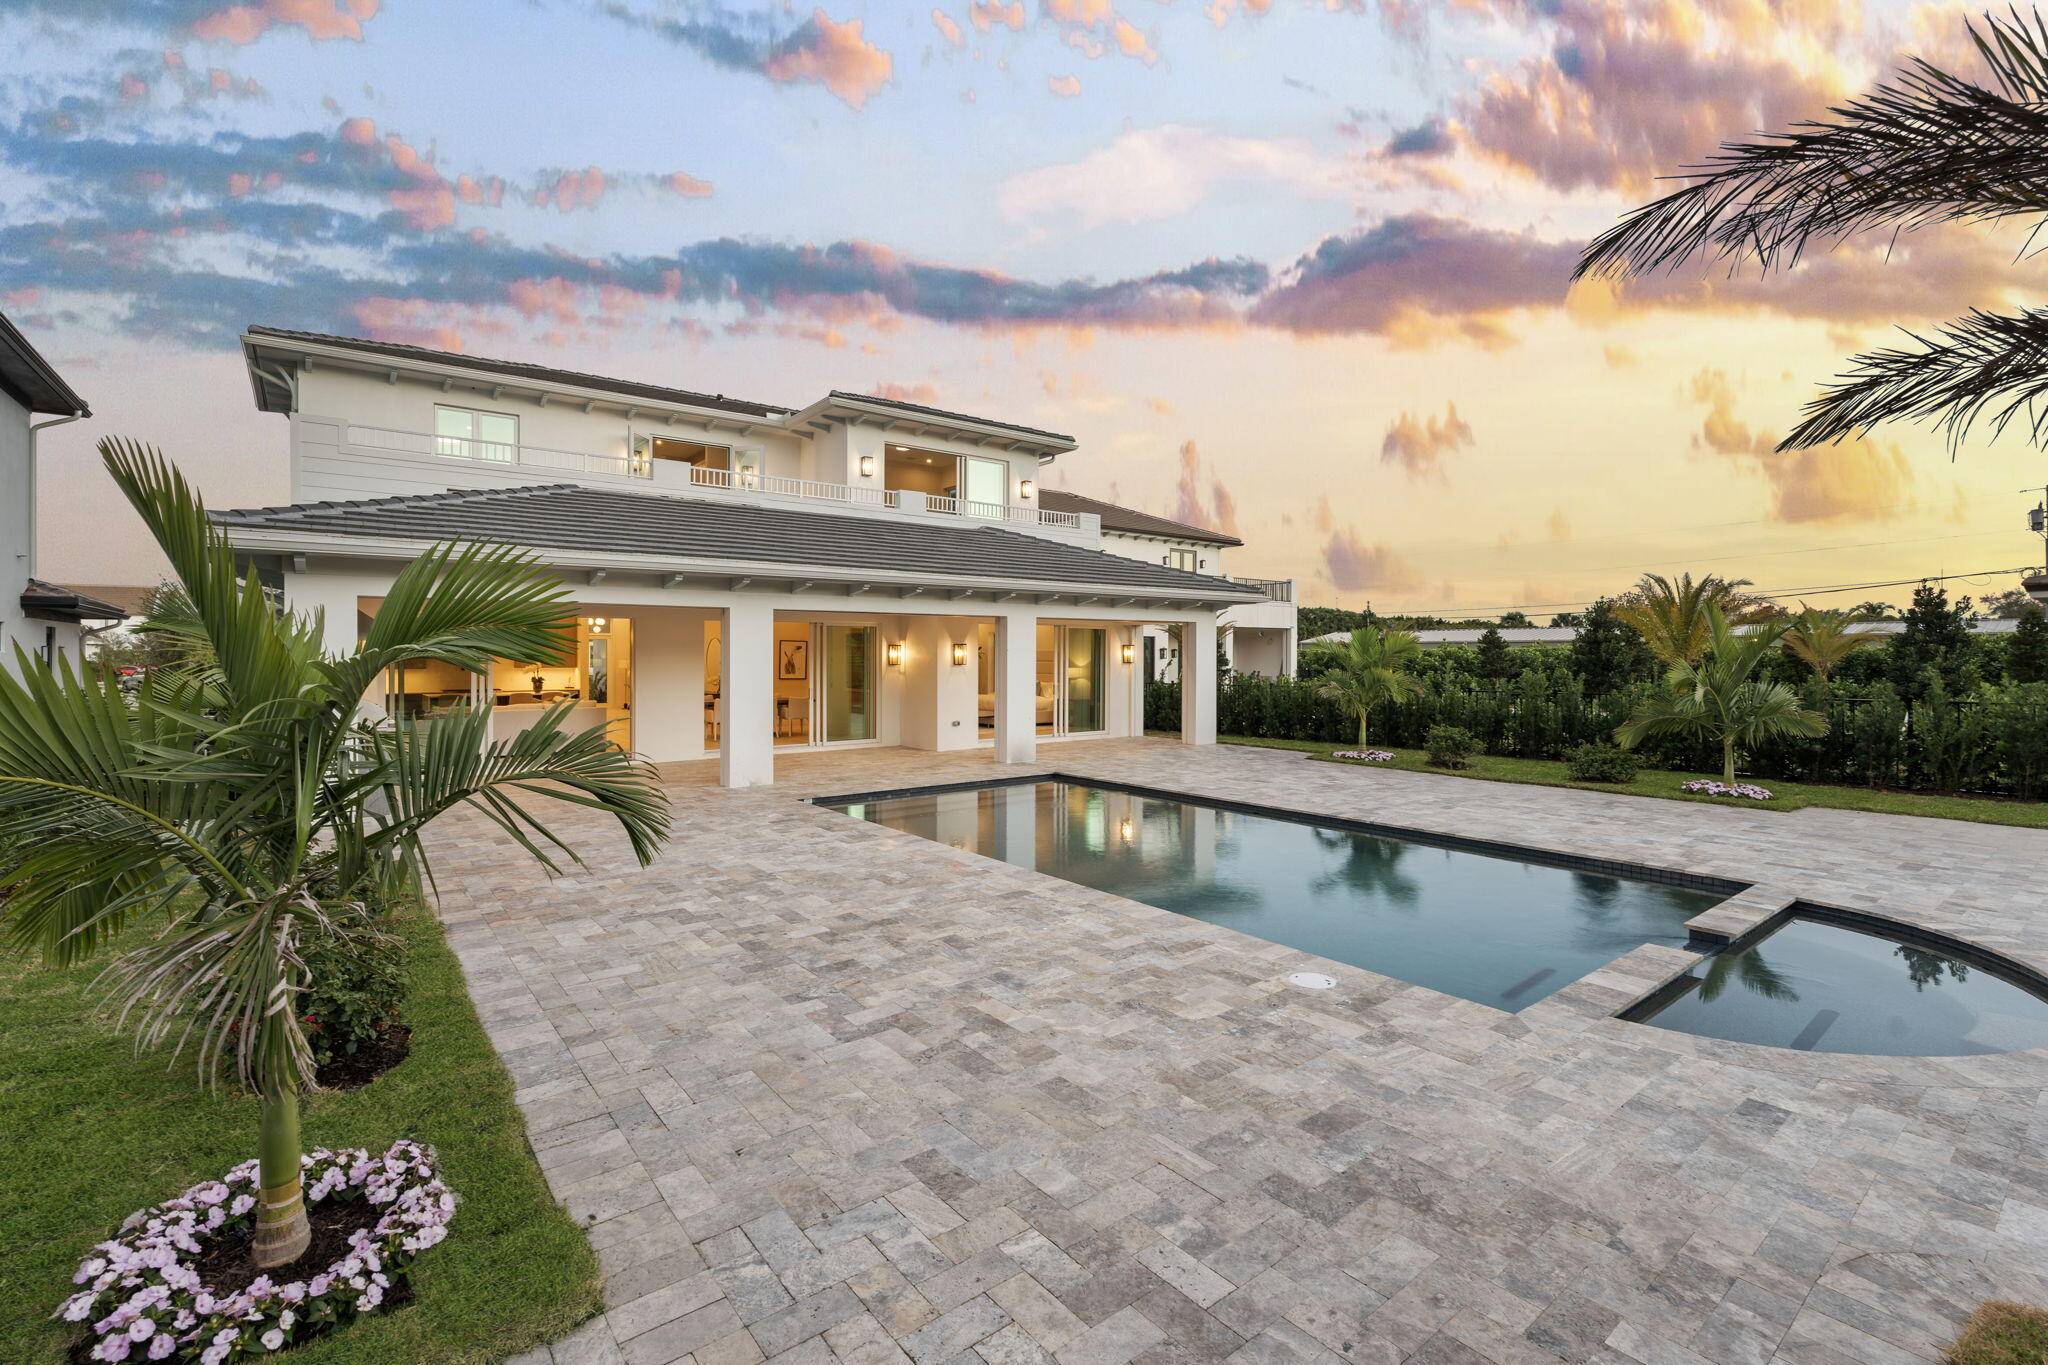 Presenting this exquisite brand new construction home within the prestigious Palm Beach Polo Club.